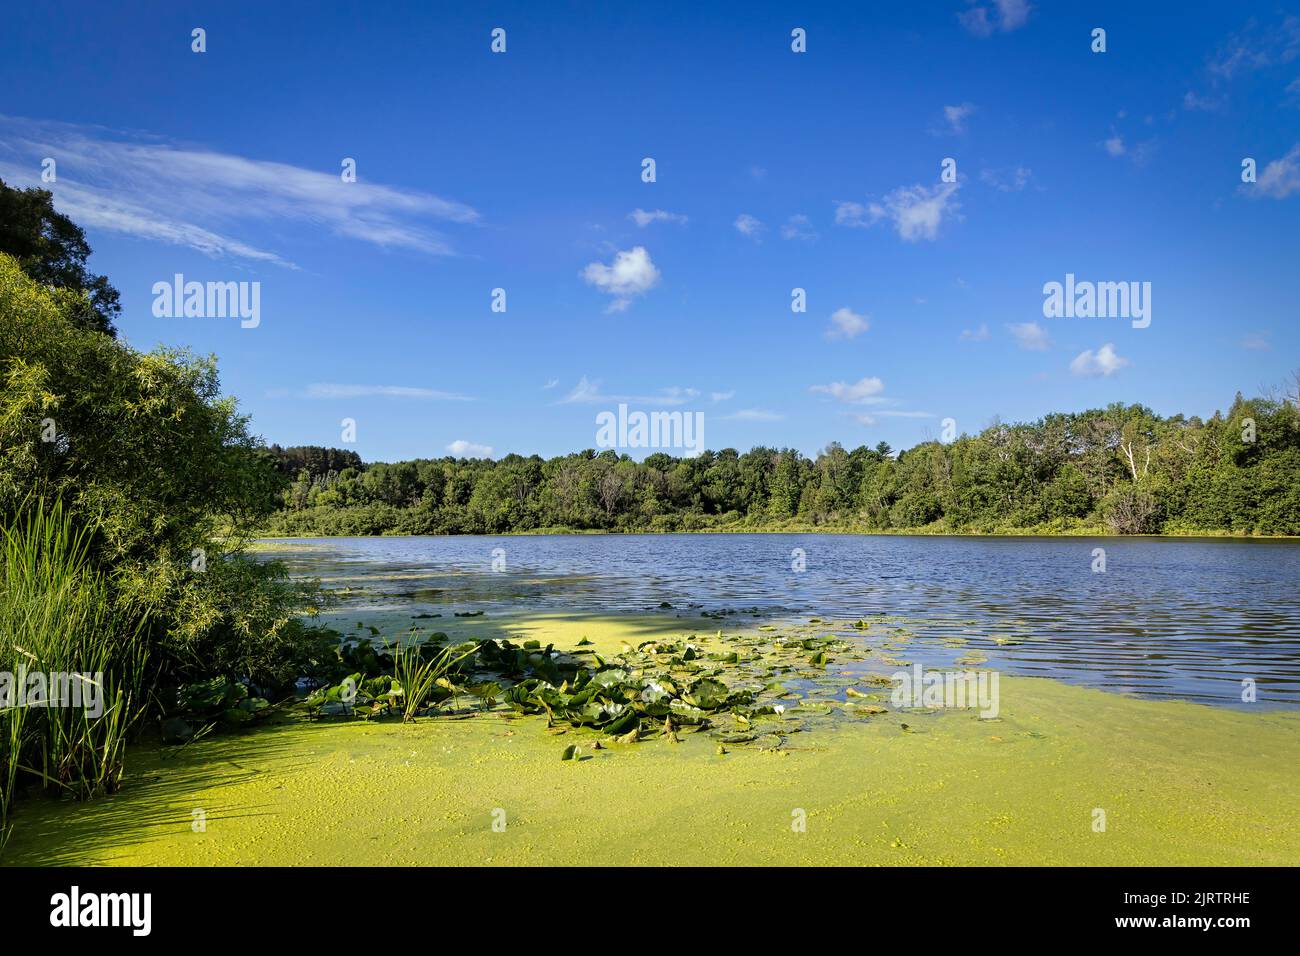 A view of the green weed beds on Gass Lake near Manitowoc, Wisconsin. Stock Photo